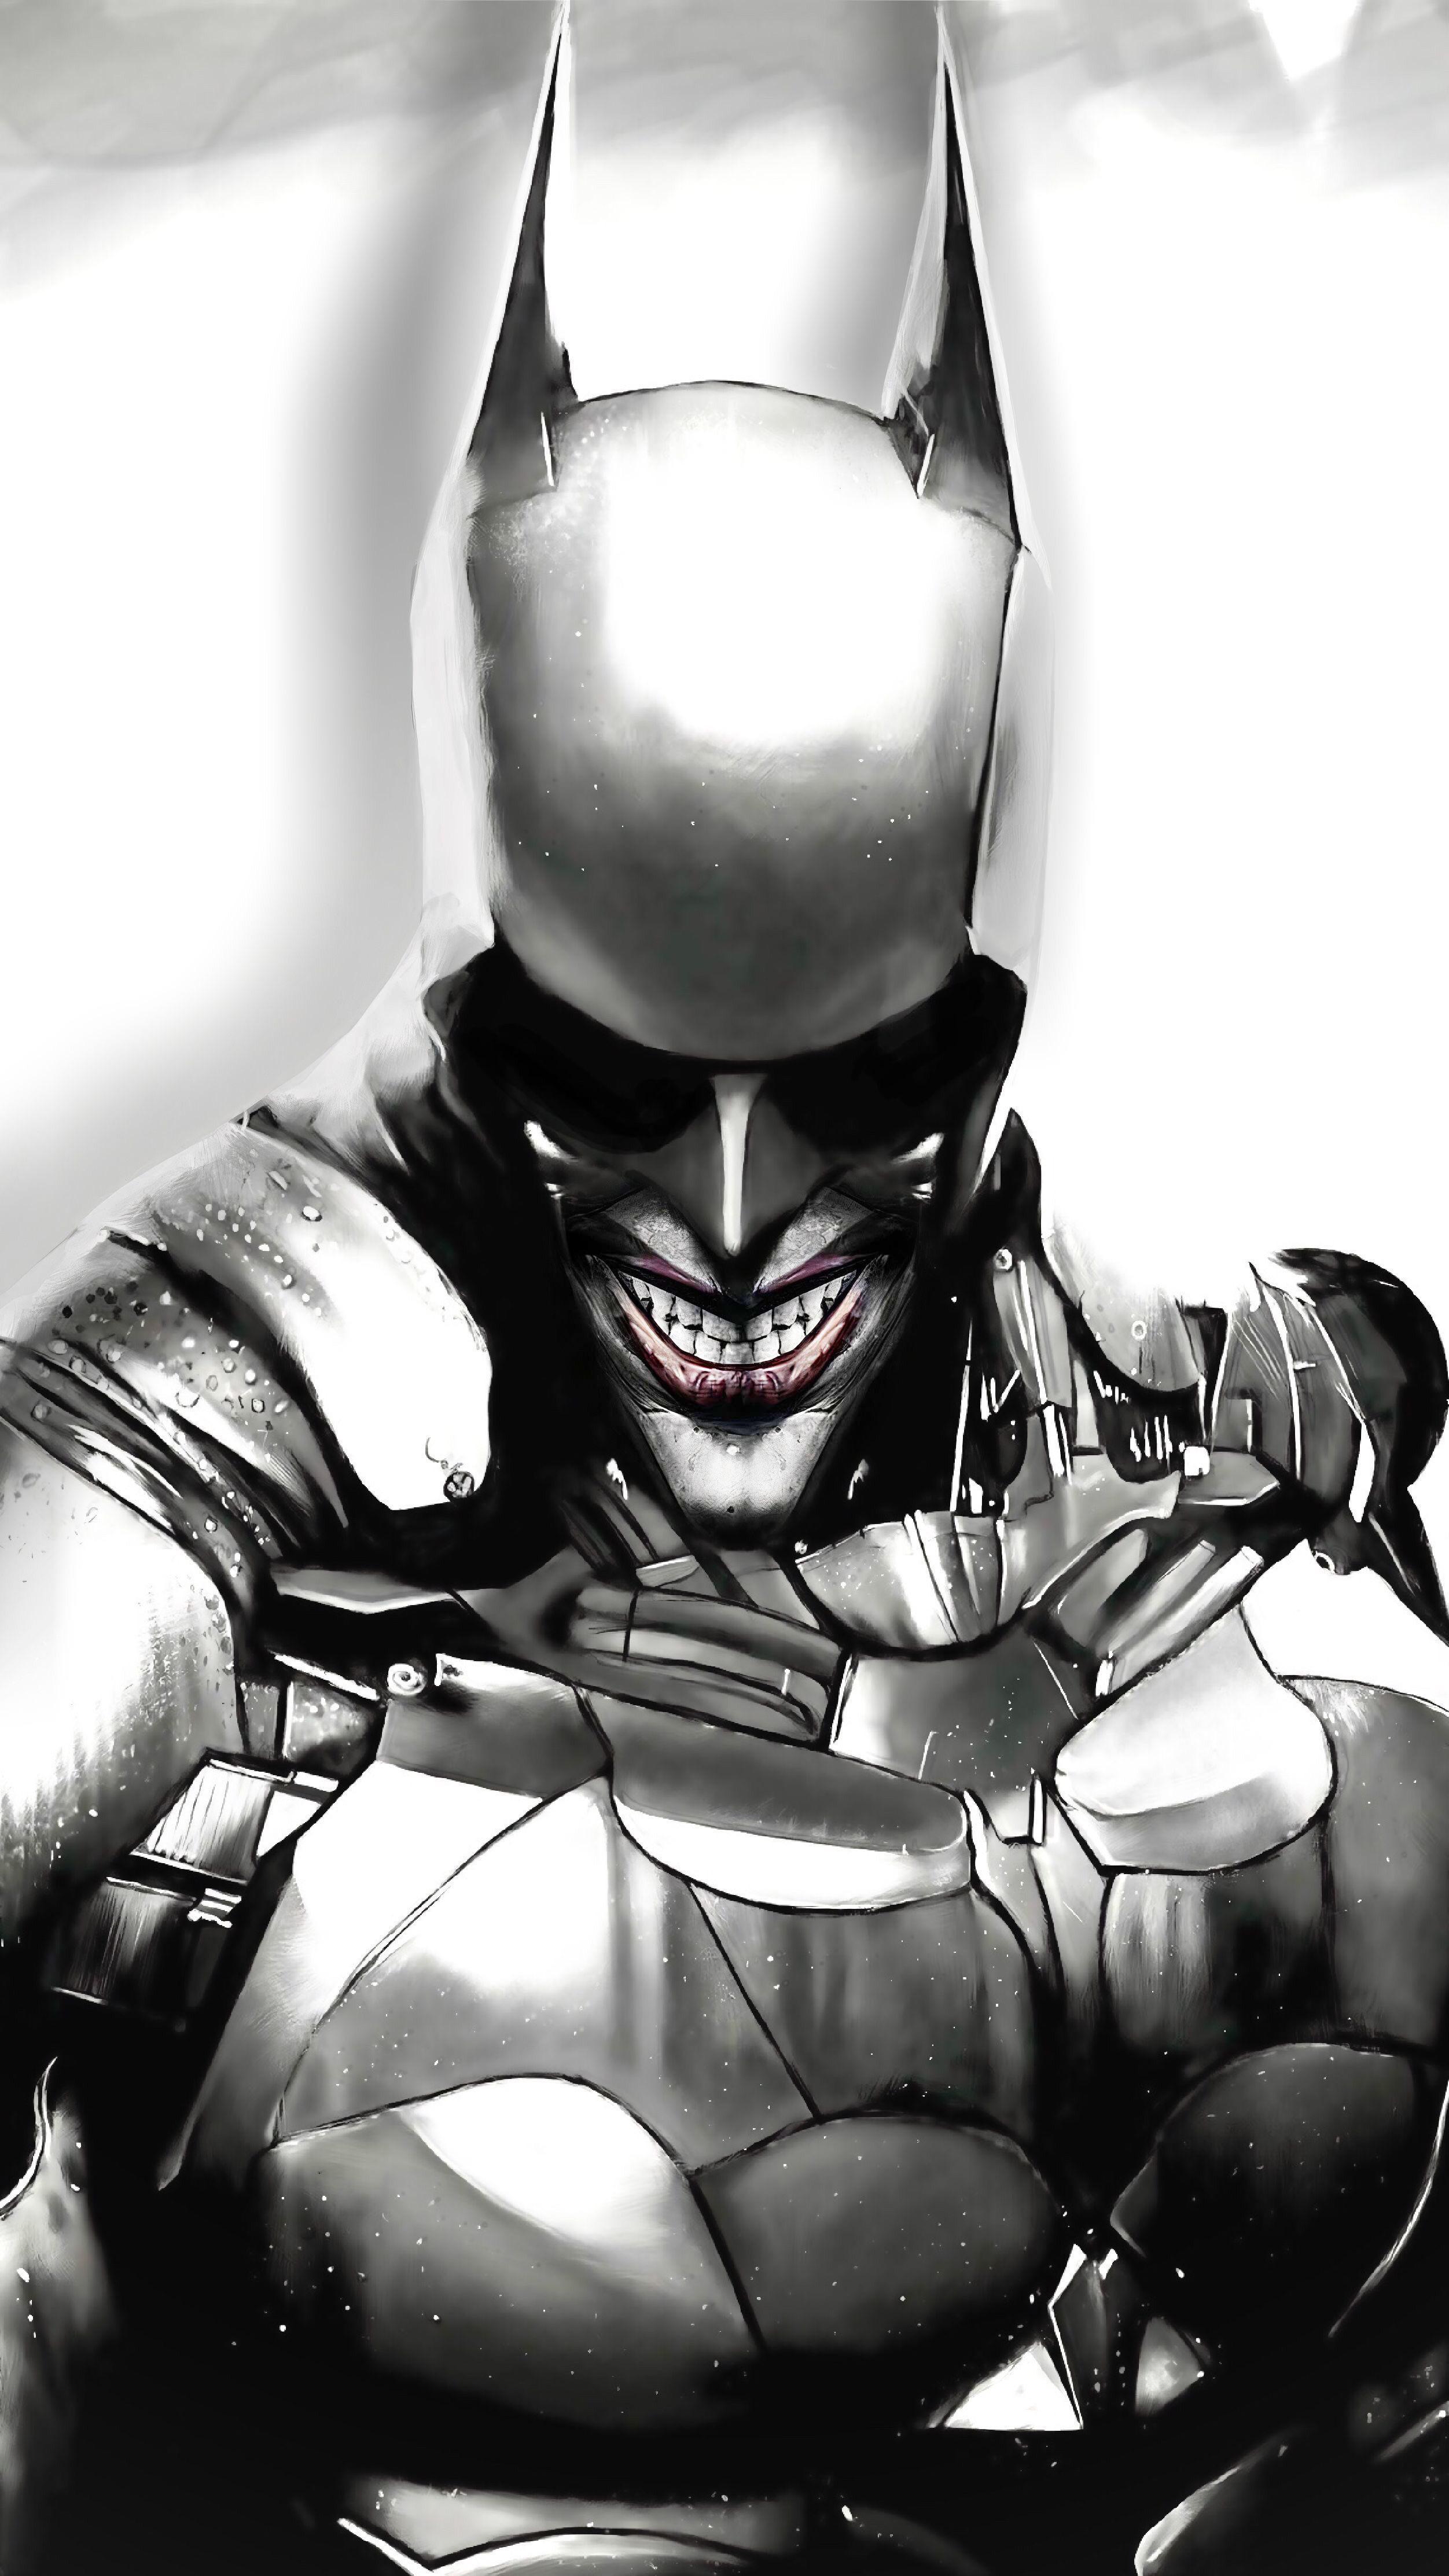 Here S An Arkham City Inspired Knight Phone Wallpaper I